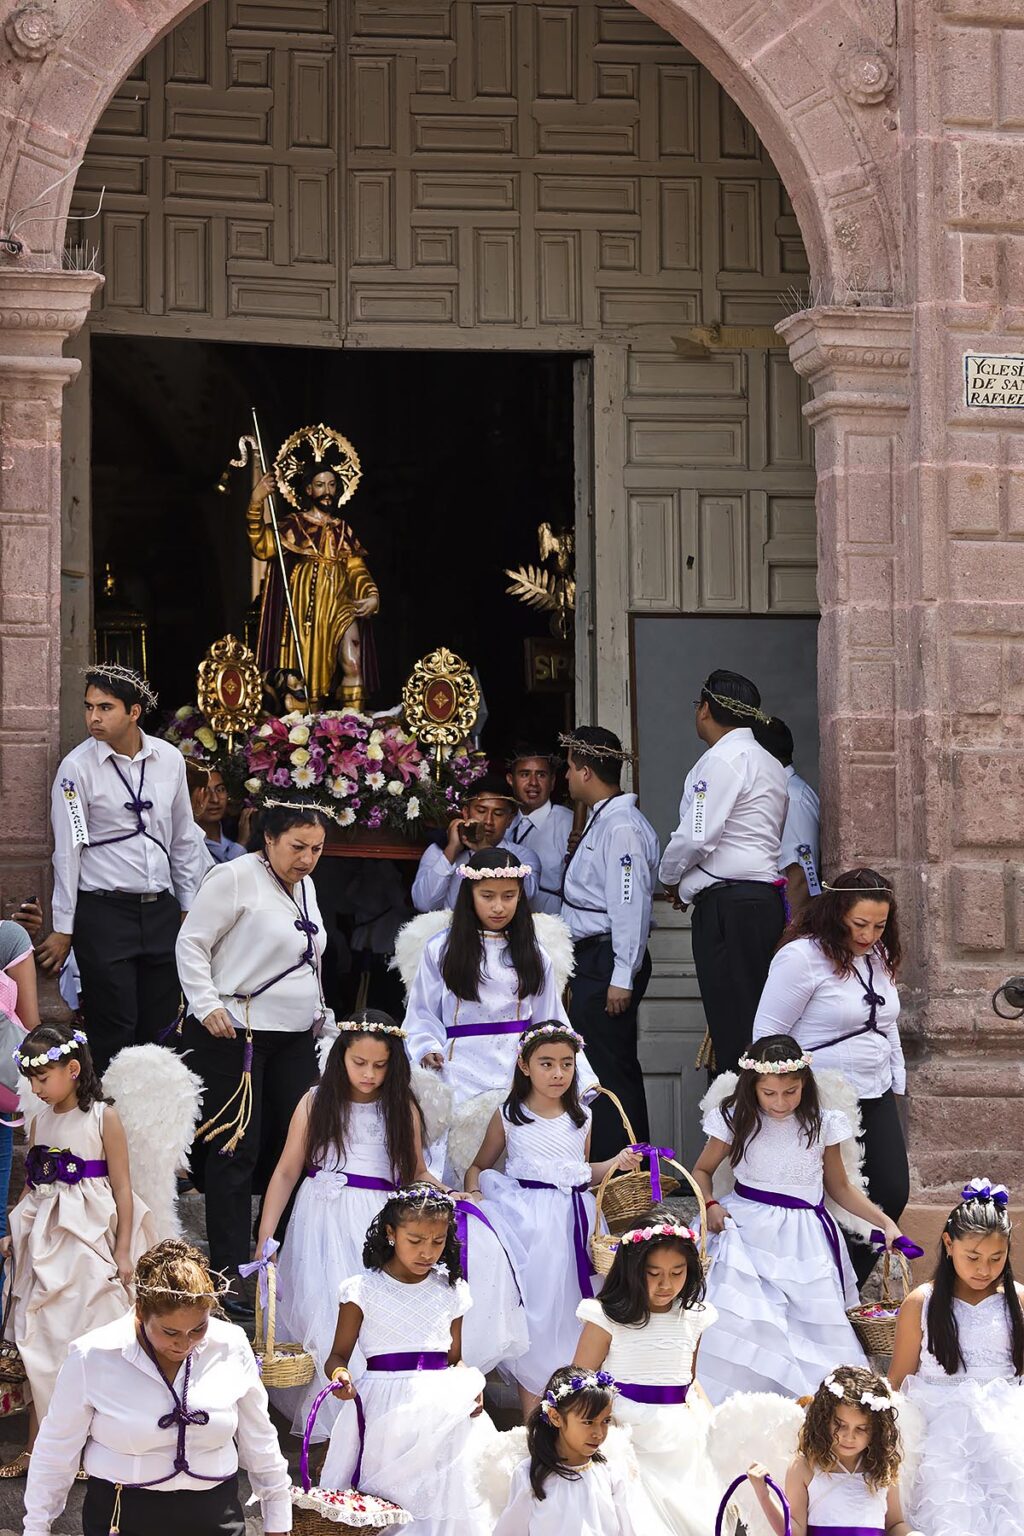 Young girls dressed as ANGELS descend the steps of the SAN RAFAEL chapel during the Good Friday Procession called Santo Encuentro - SAN MIGUEL DE ALLENDE, MEXICO